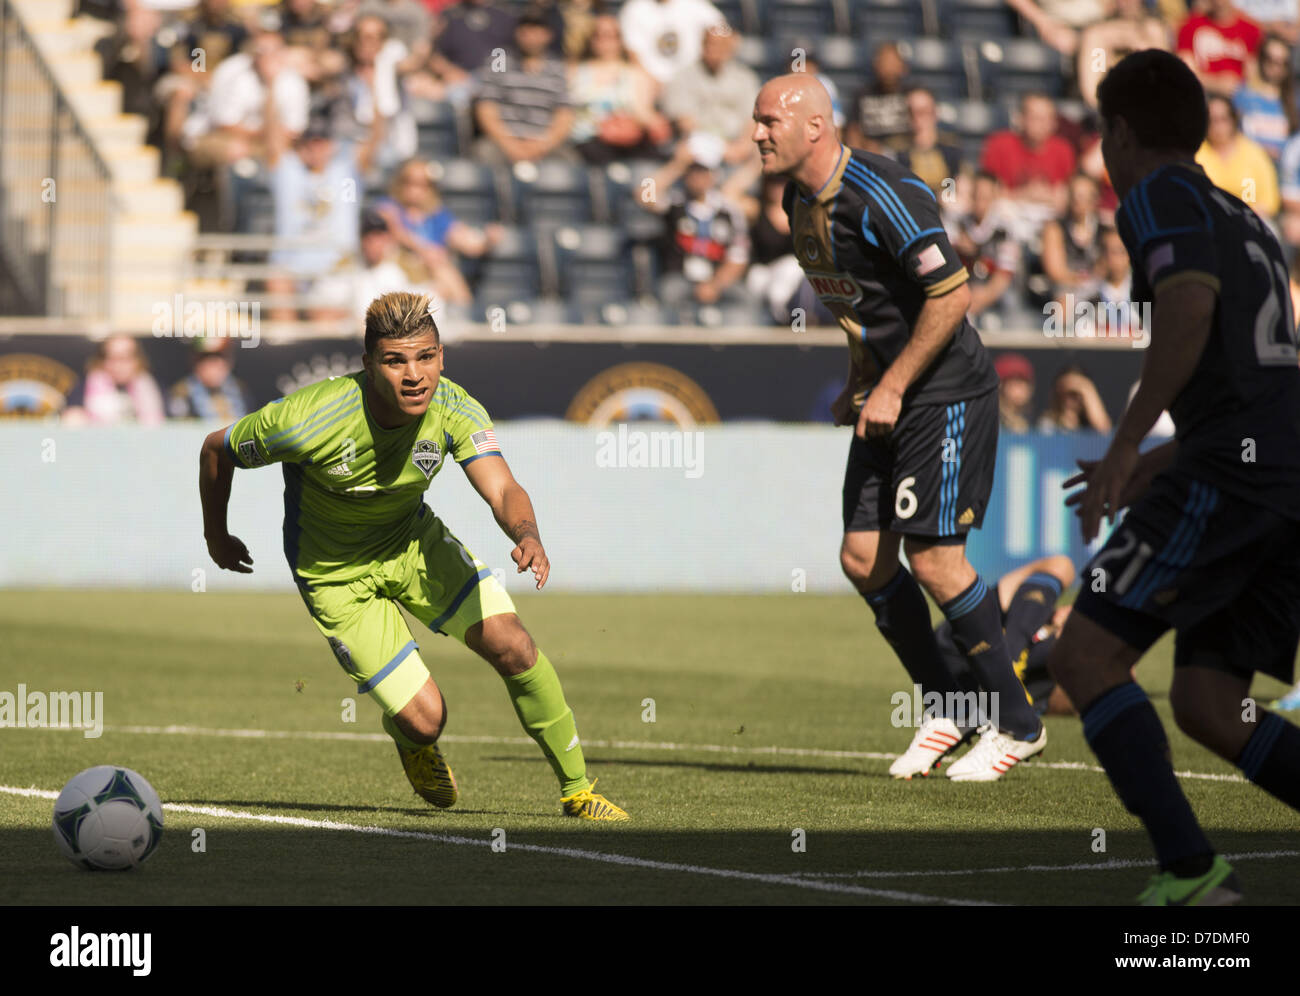 Chester, Pennsylvania, USA. 4th May, 2013. Philadelphia Union's CONOR CASEY (6) in action against the Seattle Sounder's. DEANDRE YEDLIN. The Union and the Sounders played to a 2-2 draw at the Unions home field, PPL Park (Credit Image: © Ricky Fitchett/ZUMAPRESS.com) Stock Photo